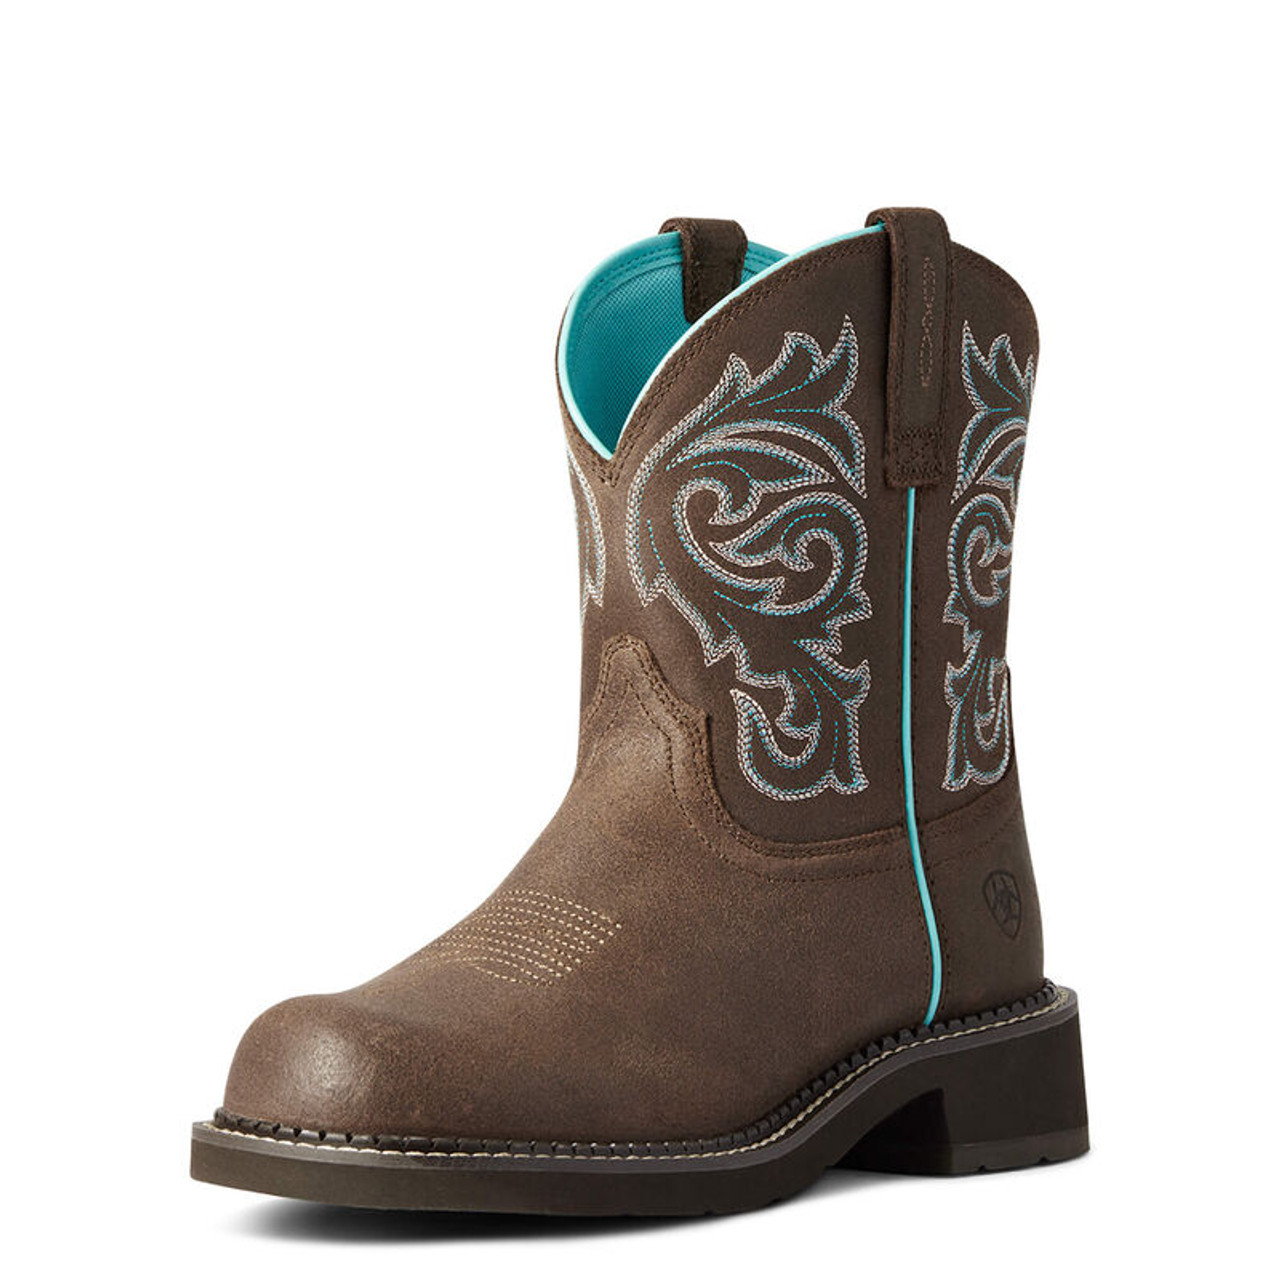 Where to Buy Ariat Fatbaby Heritage Cowgirl Boots?